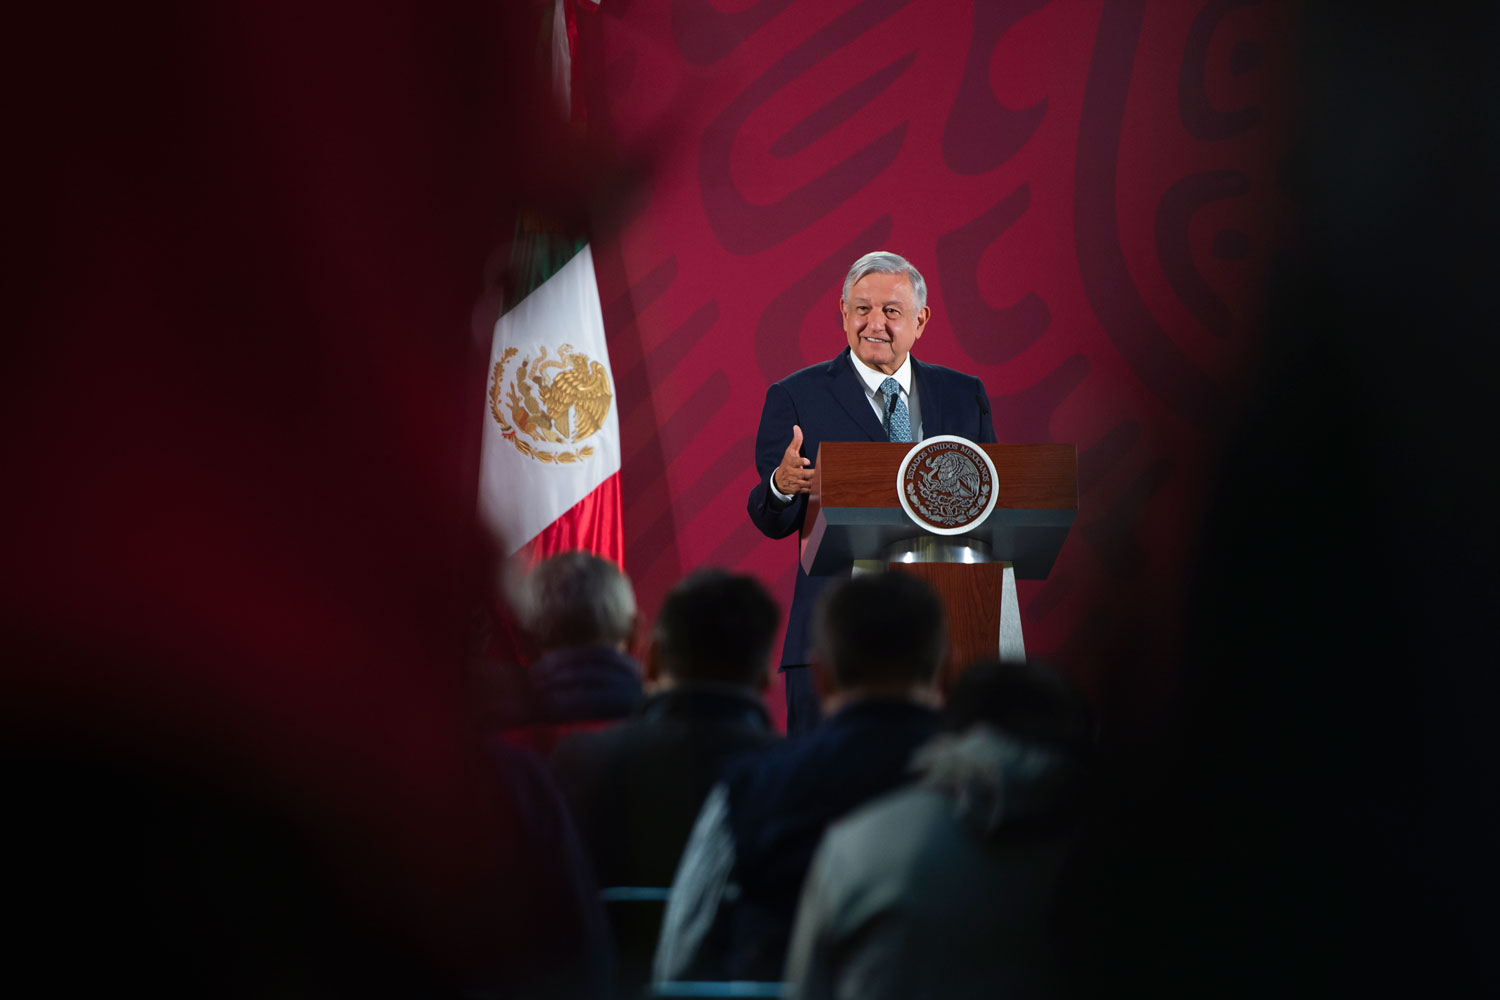 Amid growing coronavirus threat, Mexico’s president says he’s putting trust in good-luck charms